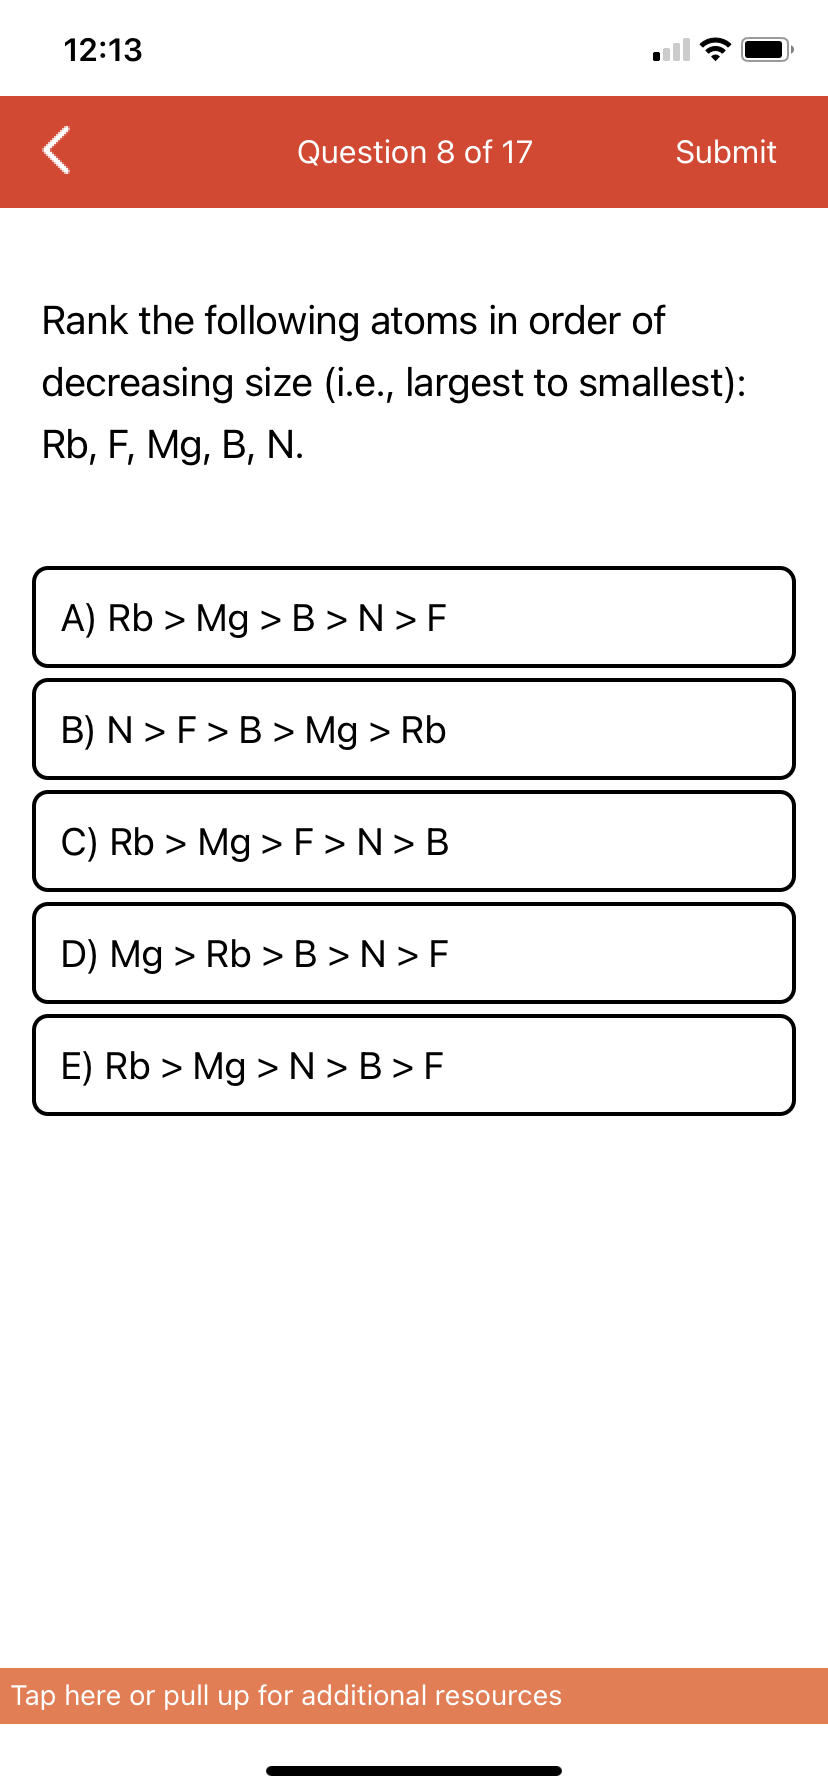 12:13
Question 8 of 17
Submit
Rank the following atoms in order of
decreasing size (i.e., largest to smallest):
Rb, F, Mg, B, N.
A) Rb > Mg >B >N > F
B) N > F>B > Mg > Rb
C) Rb > Mg > F >N> B
D) Mg > Rb >B >N > F
E) Rb > Mg >N > B > F
Tap here or pull up for additional resources
